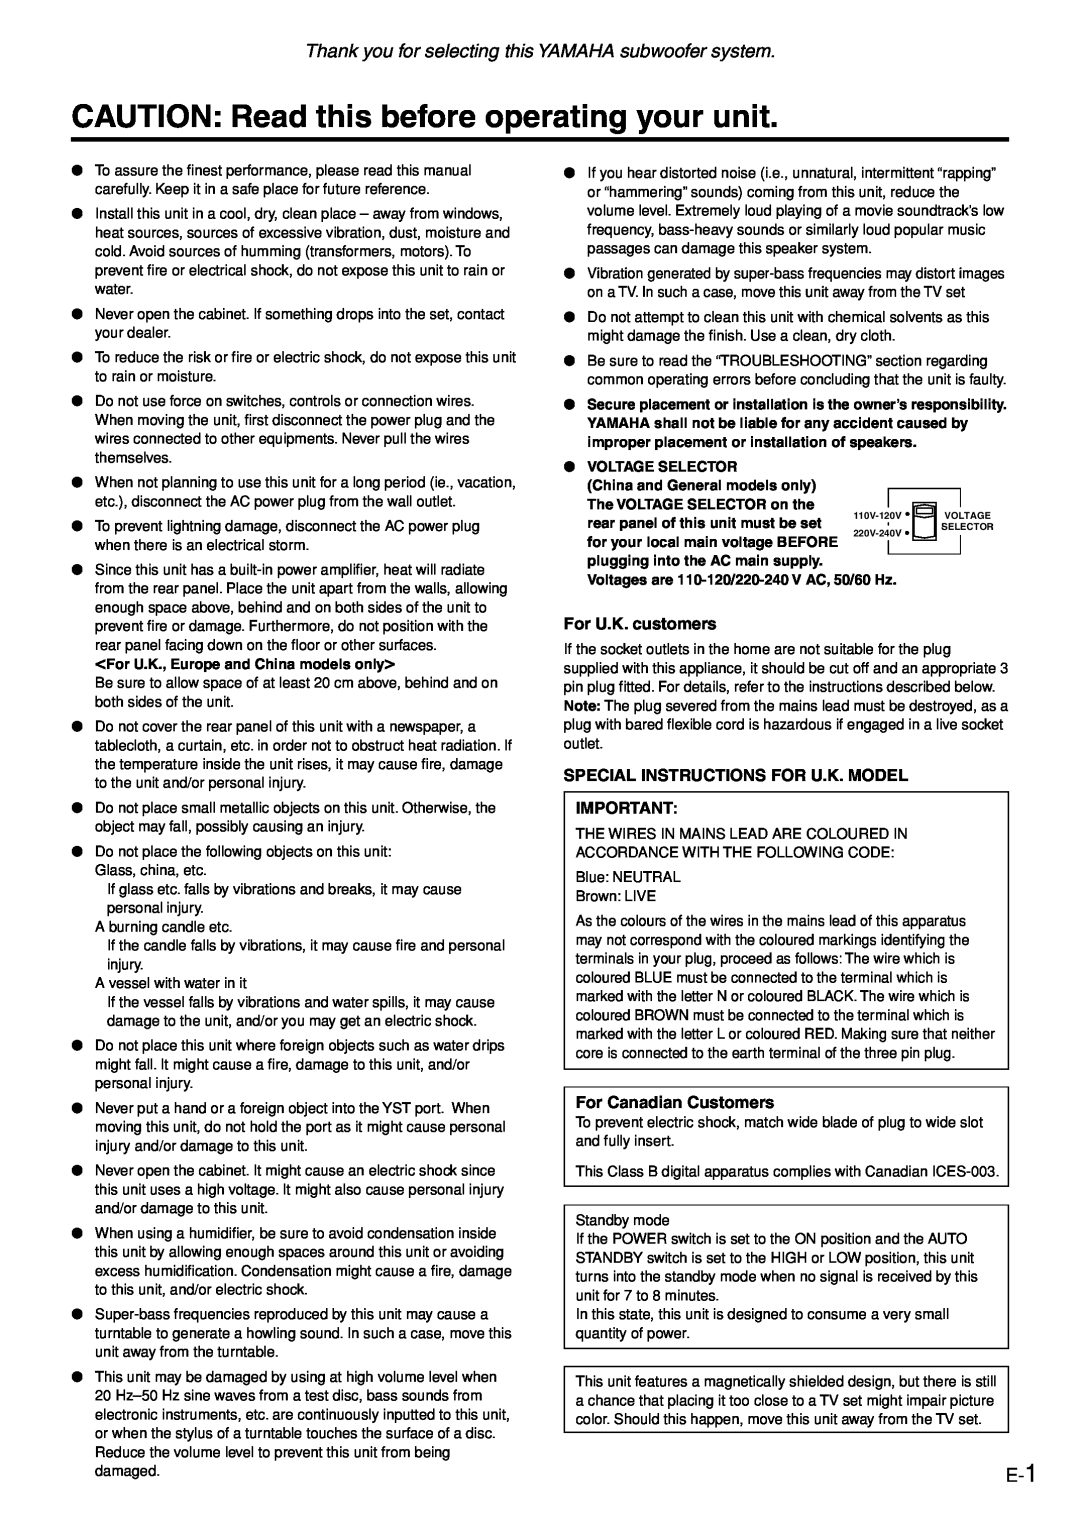 Yamaha YST-SW005 CAUTION Read this before operating your unit, For U.K. customers, Special Instructions For U.K. Model 